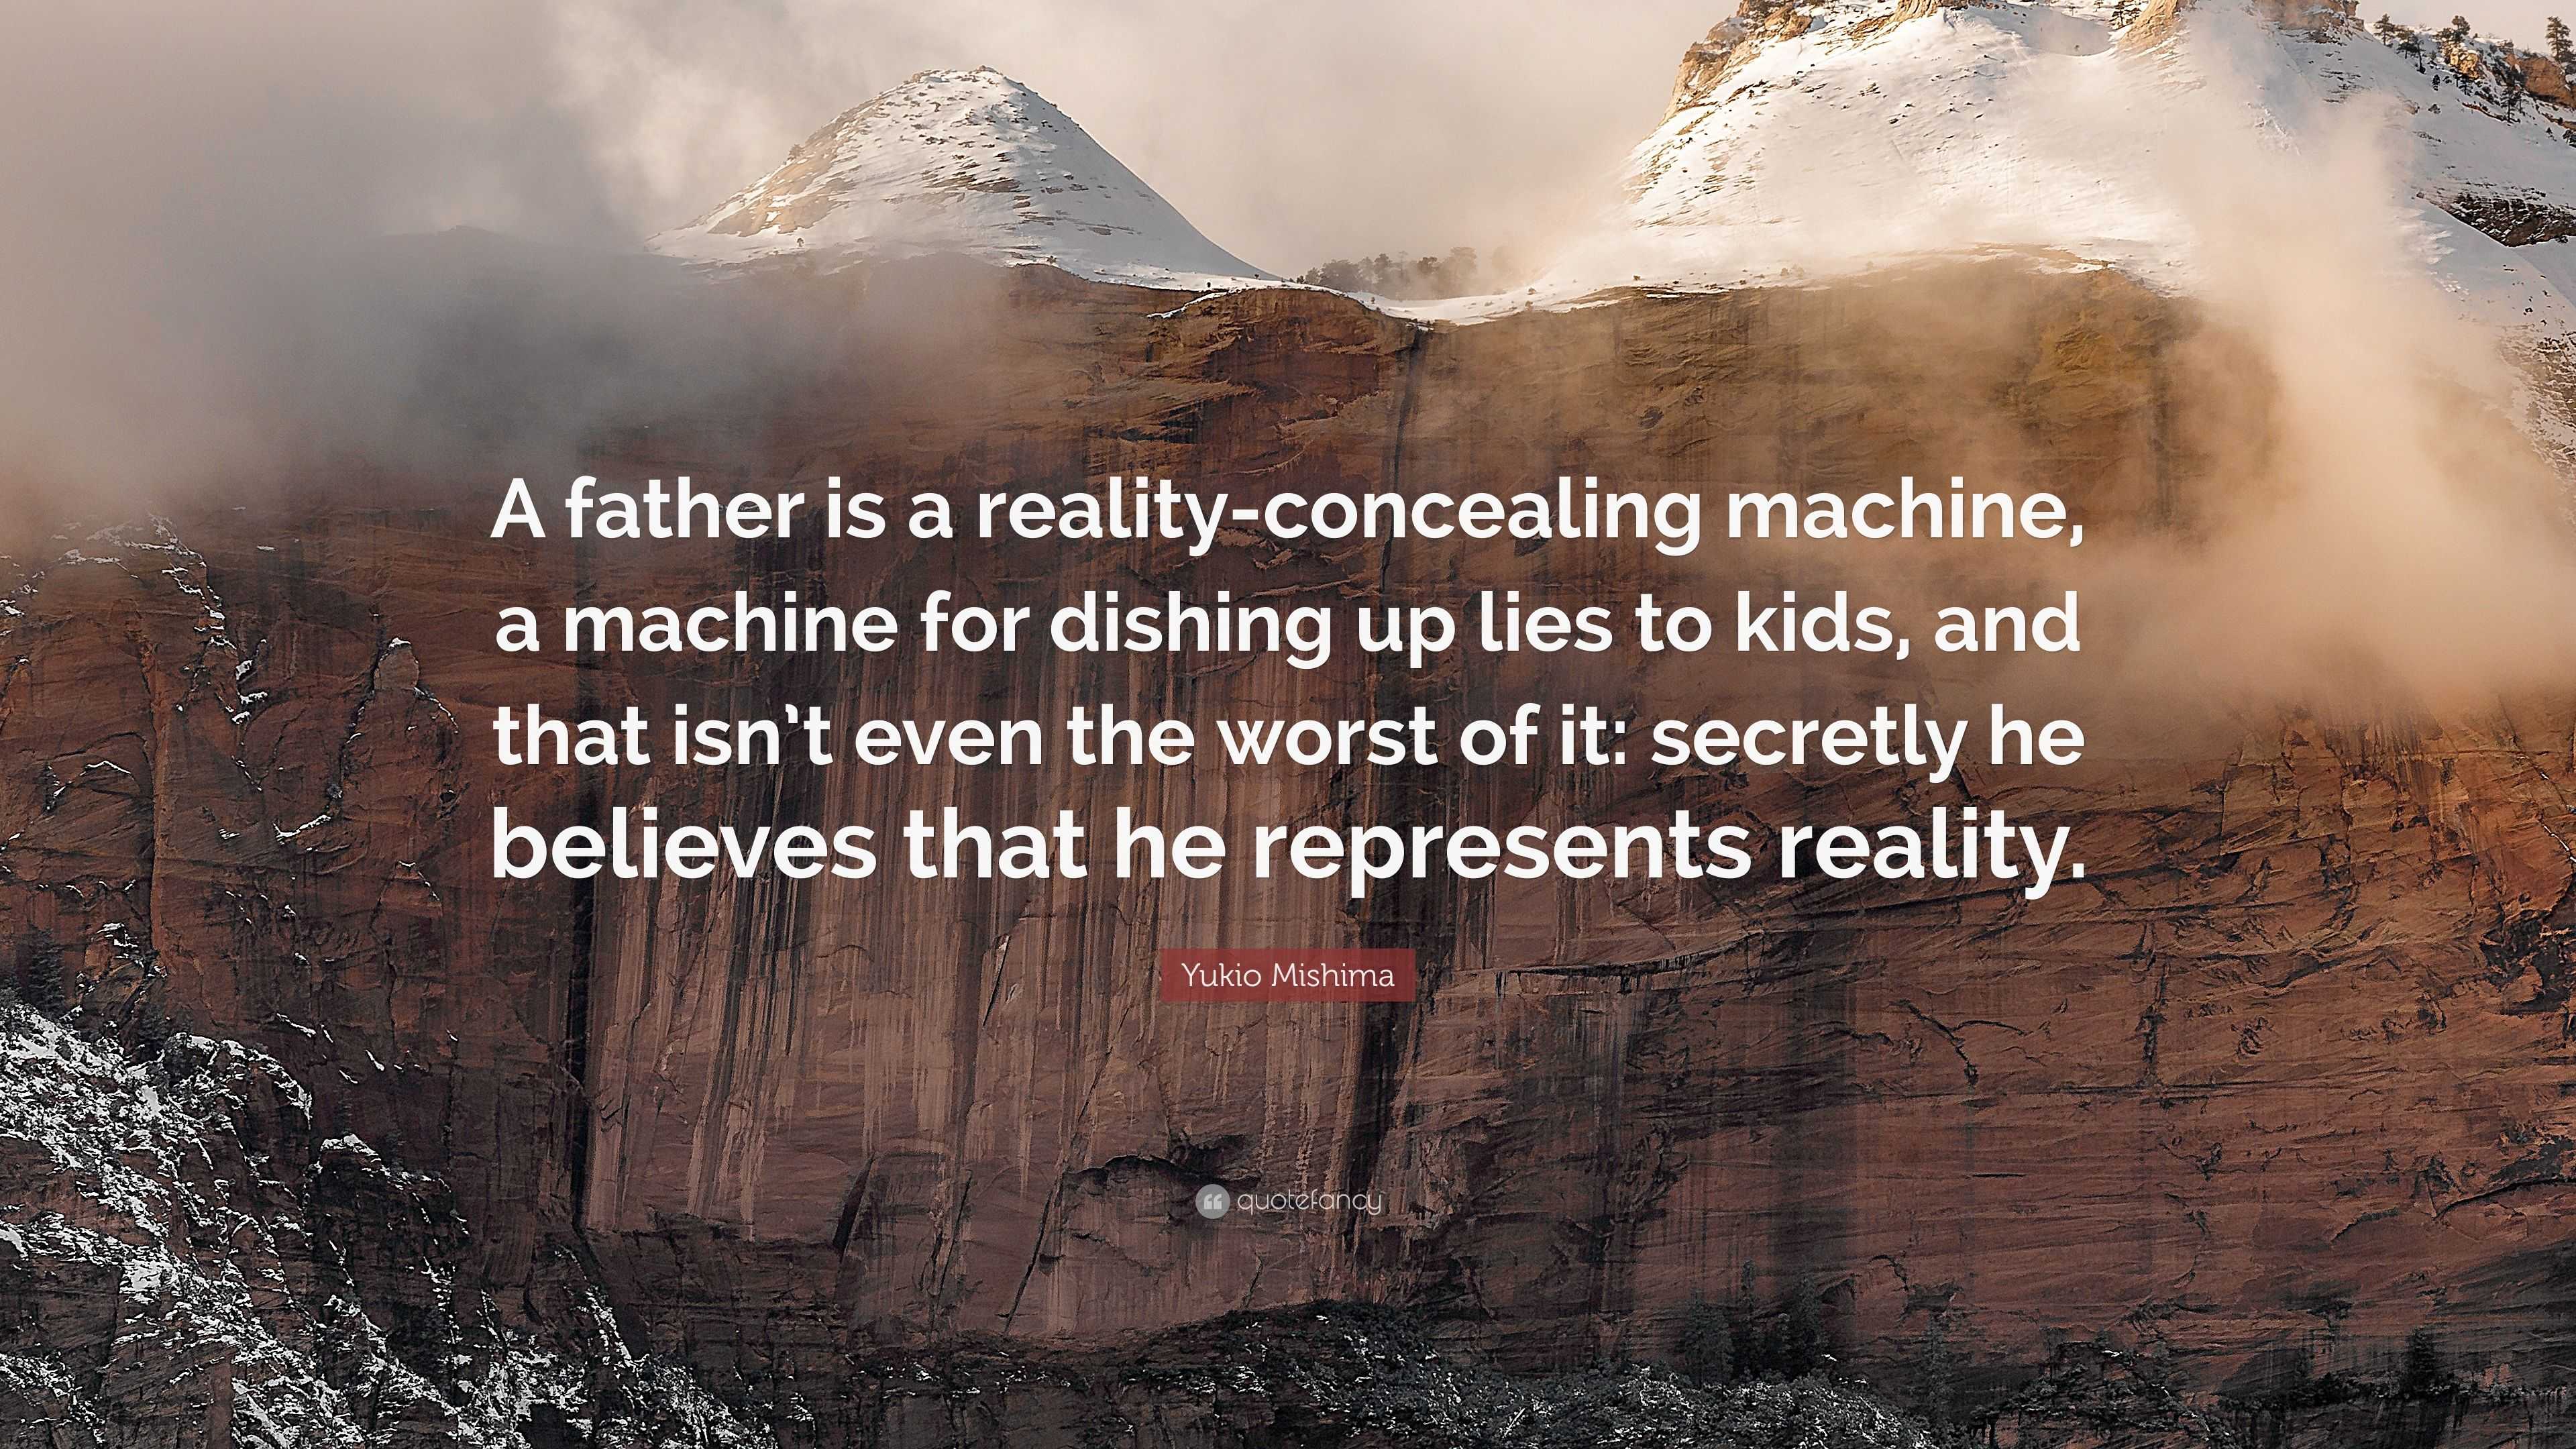 https://quotefancy.com/media/wallpaper/3840x2160/3774602-Yukio-Mishima-Quote-A-father-is-a-reality-concealing-machine-a.jpg